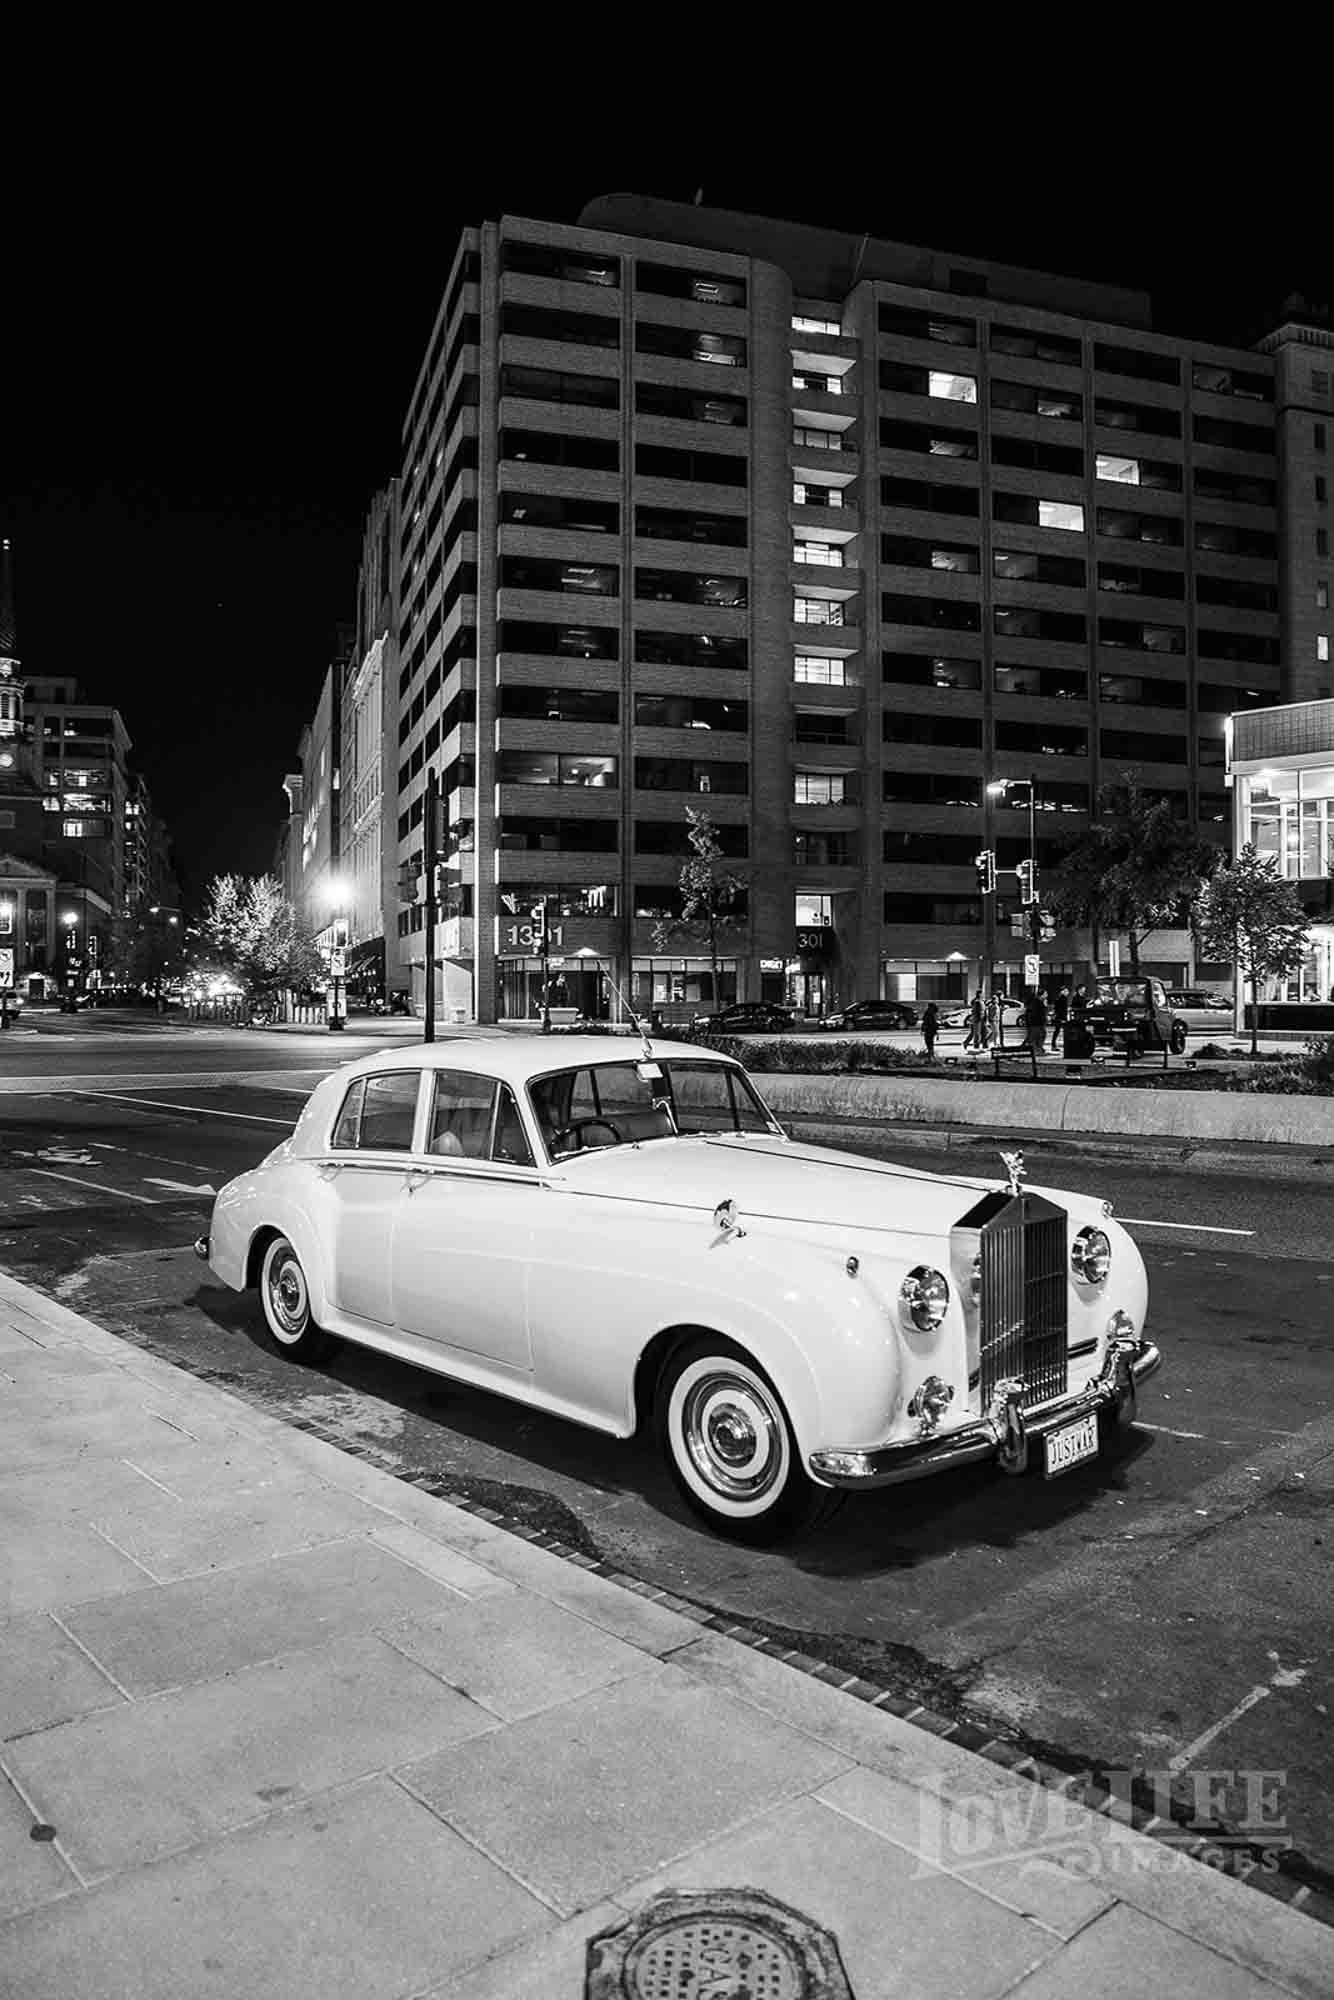 Black and white photo of a classic Rolls Royce in downtown Washington DC